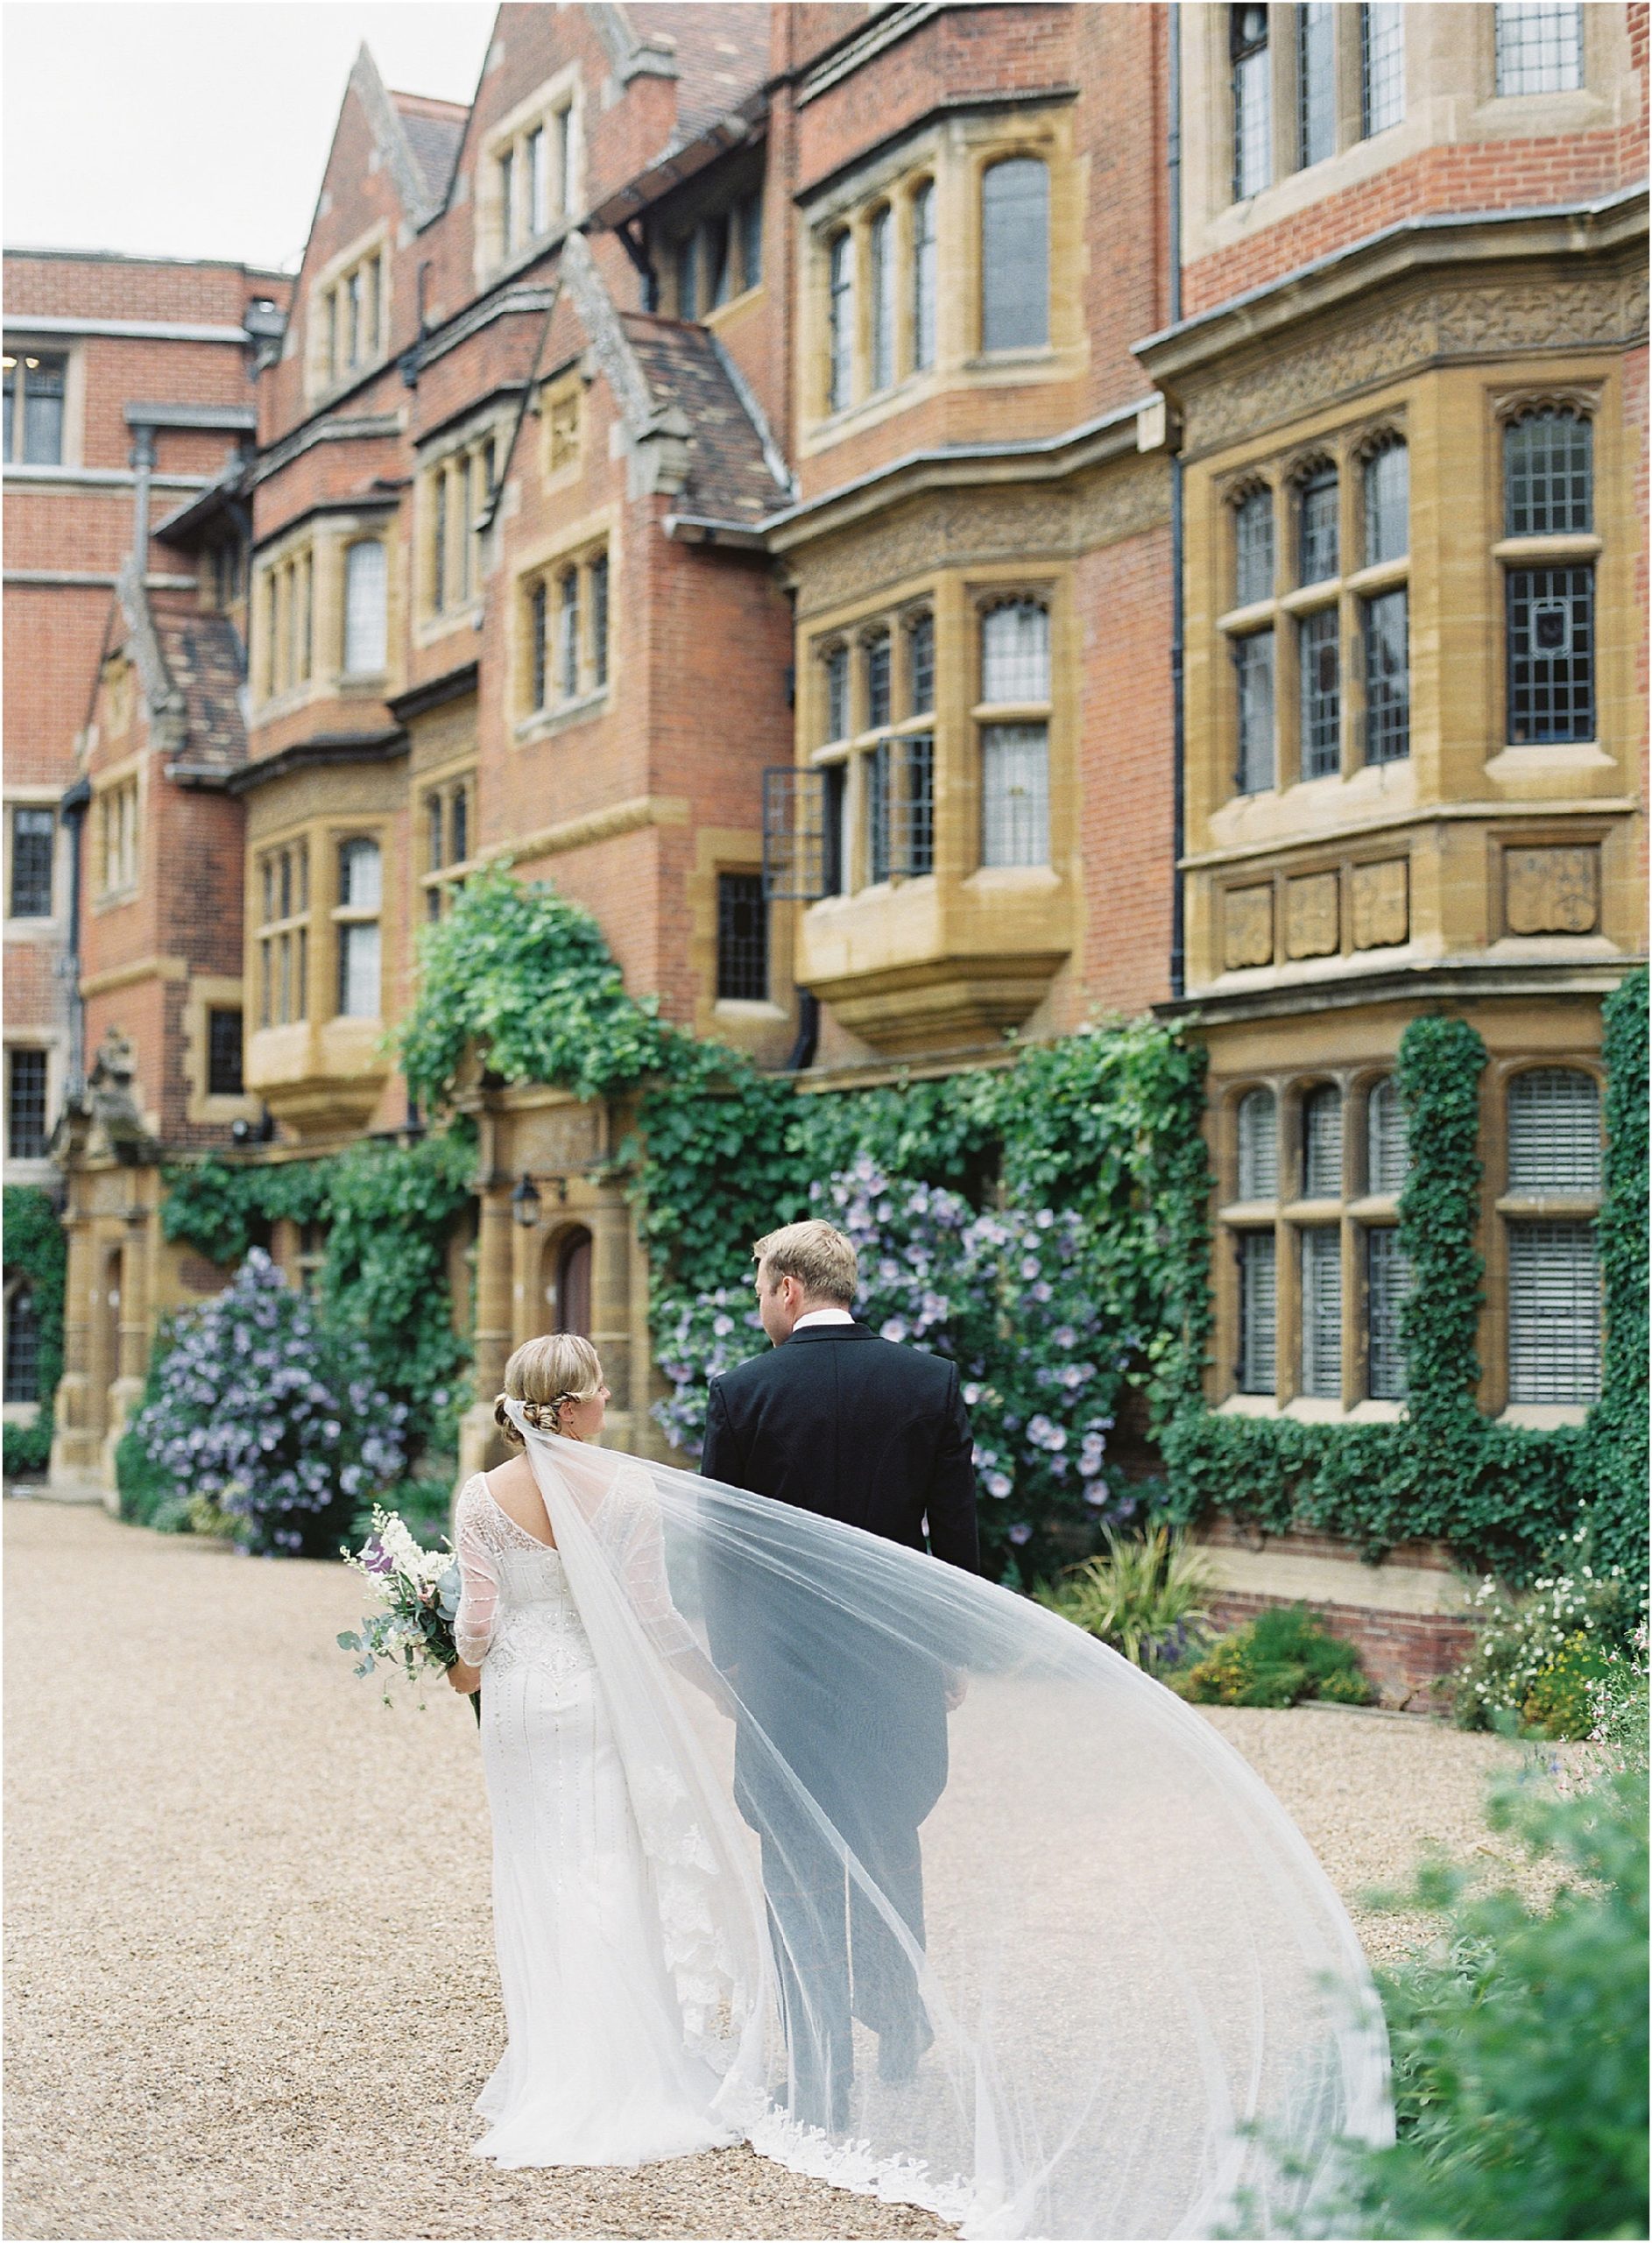 Bride and groom walking away in the grounds of Trinity Hall Cambridge